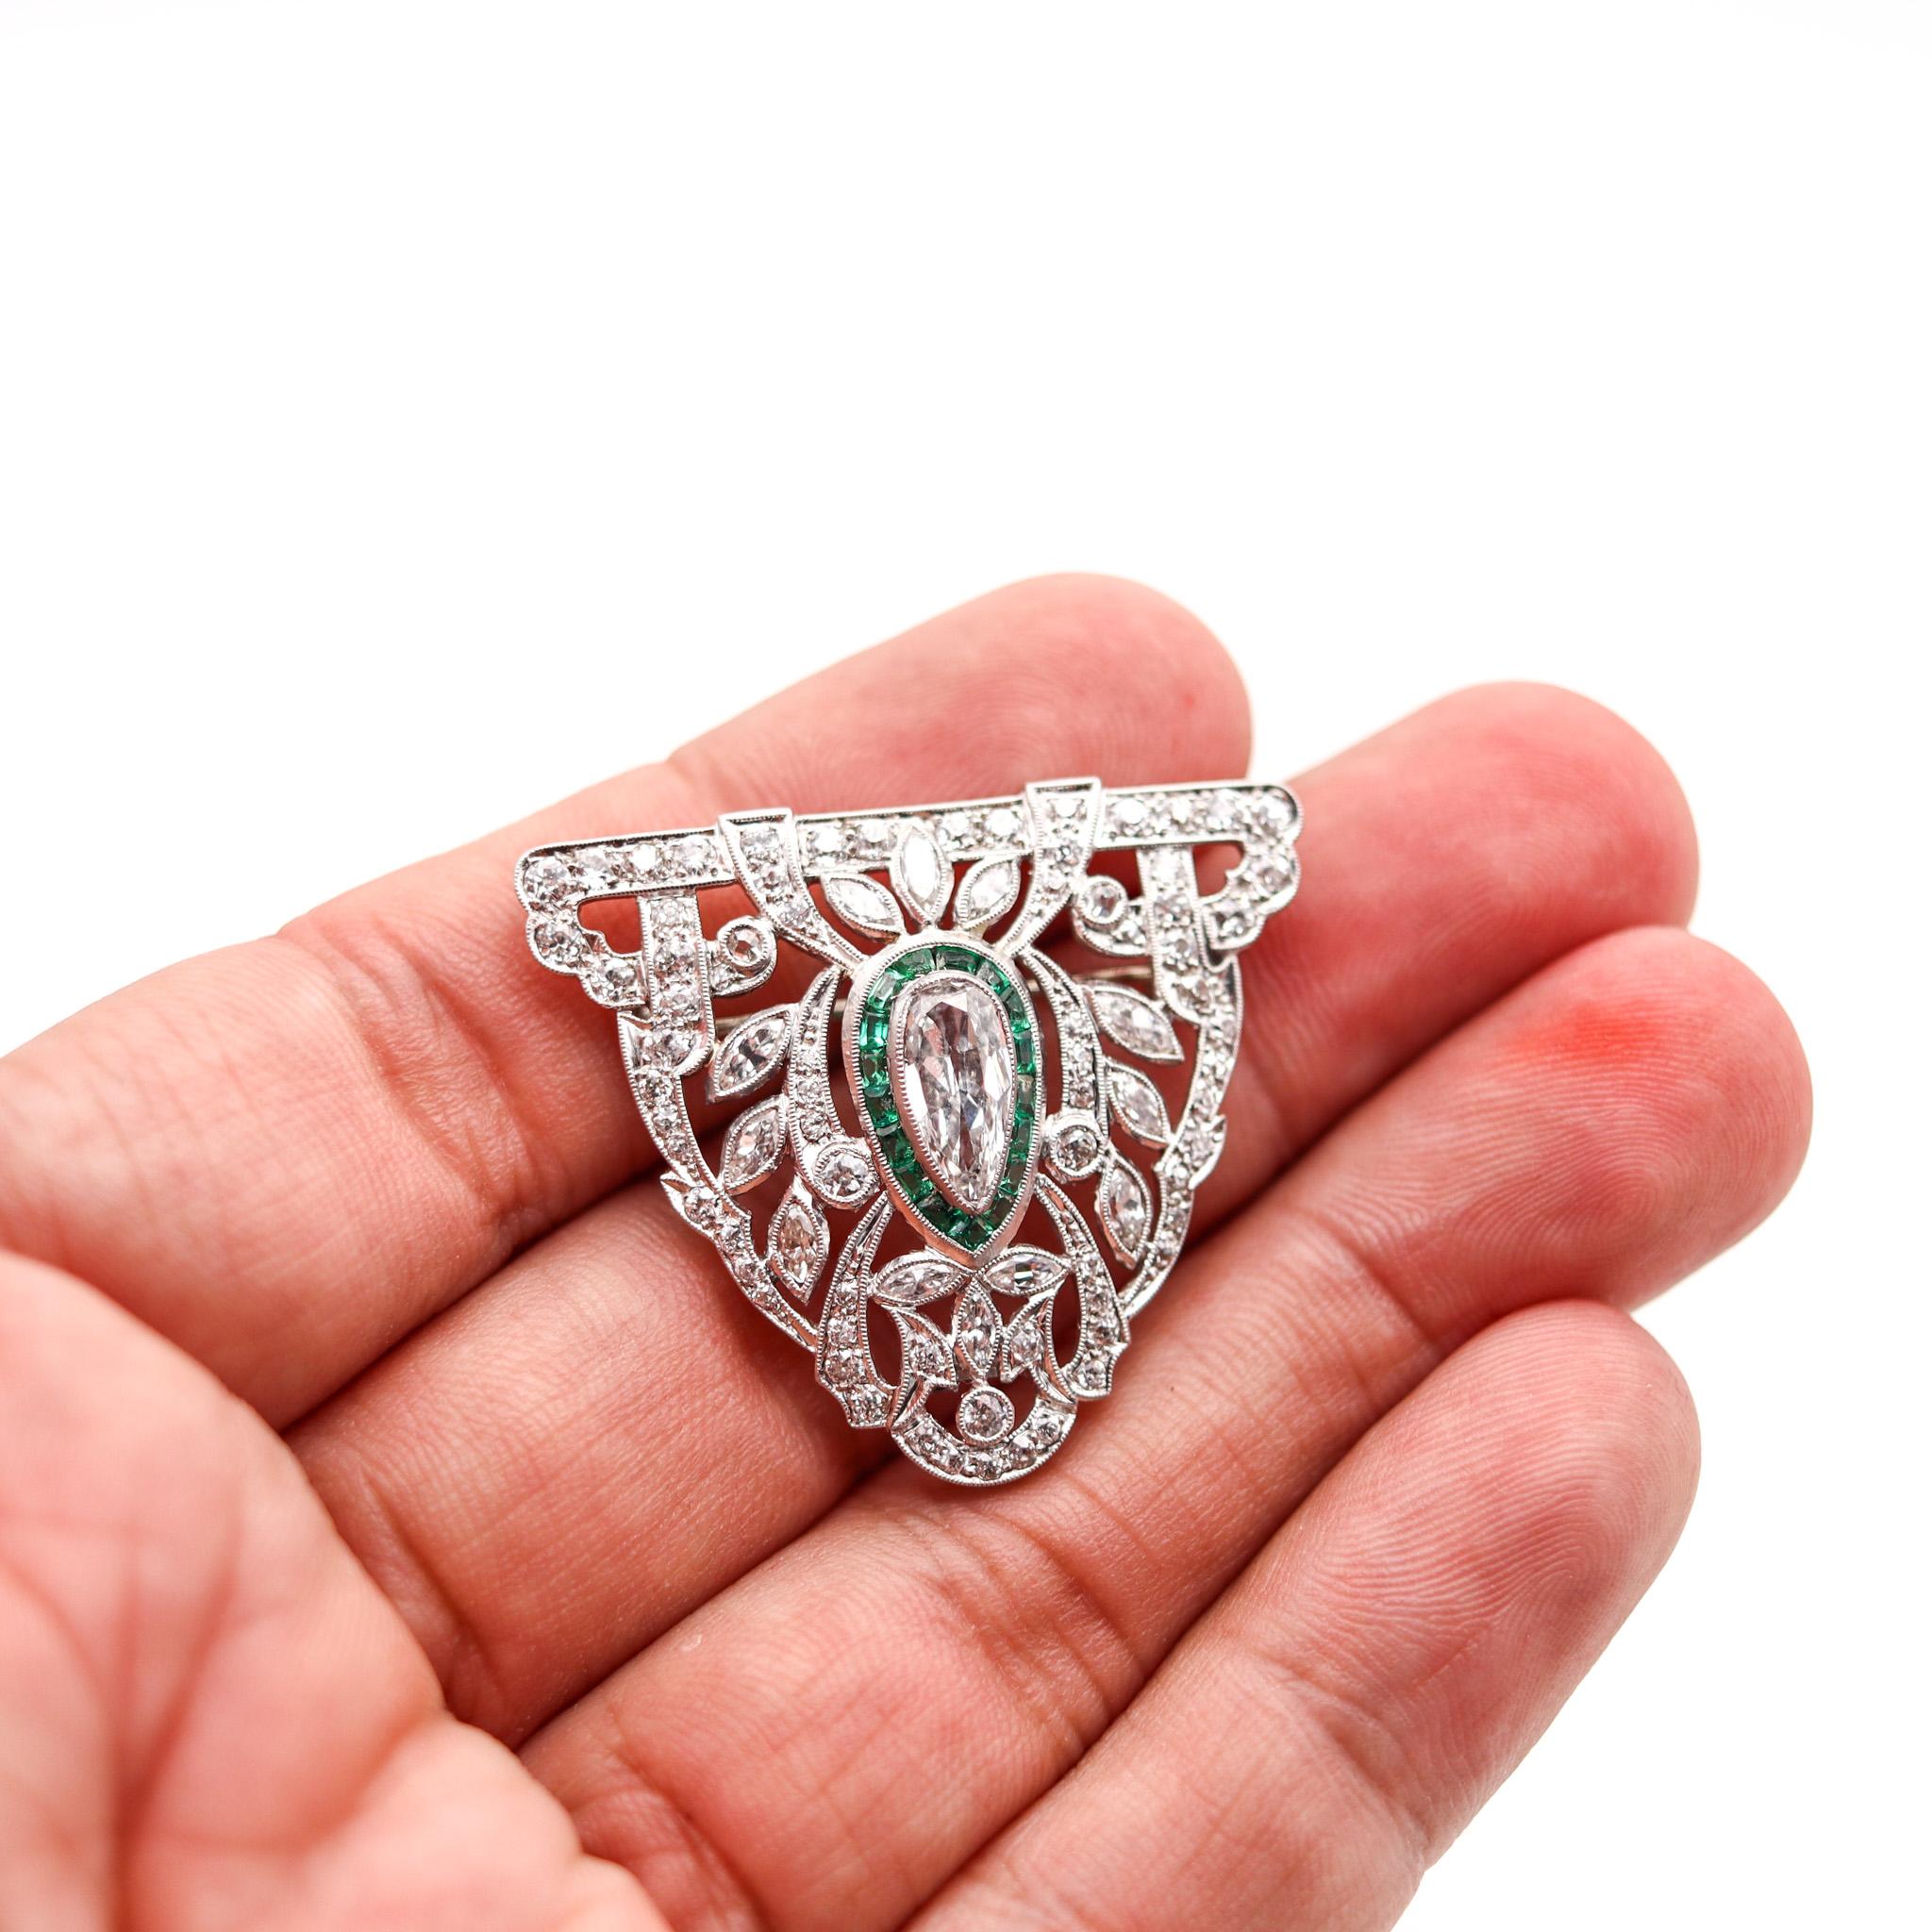 Women's Art Deco 1930 Pendant Brooch In Platinum With 5.01 Ctw In Diamonds And Emeralds For Sale